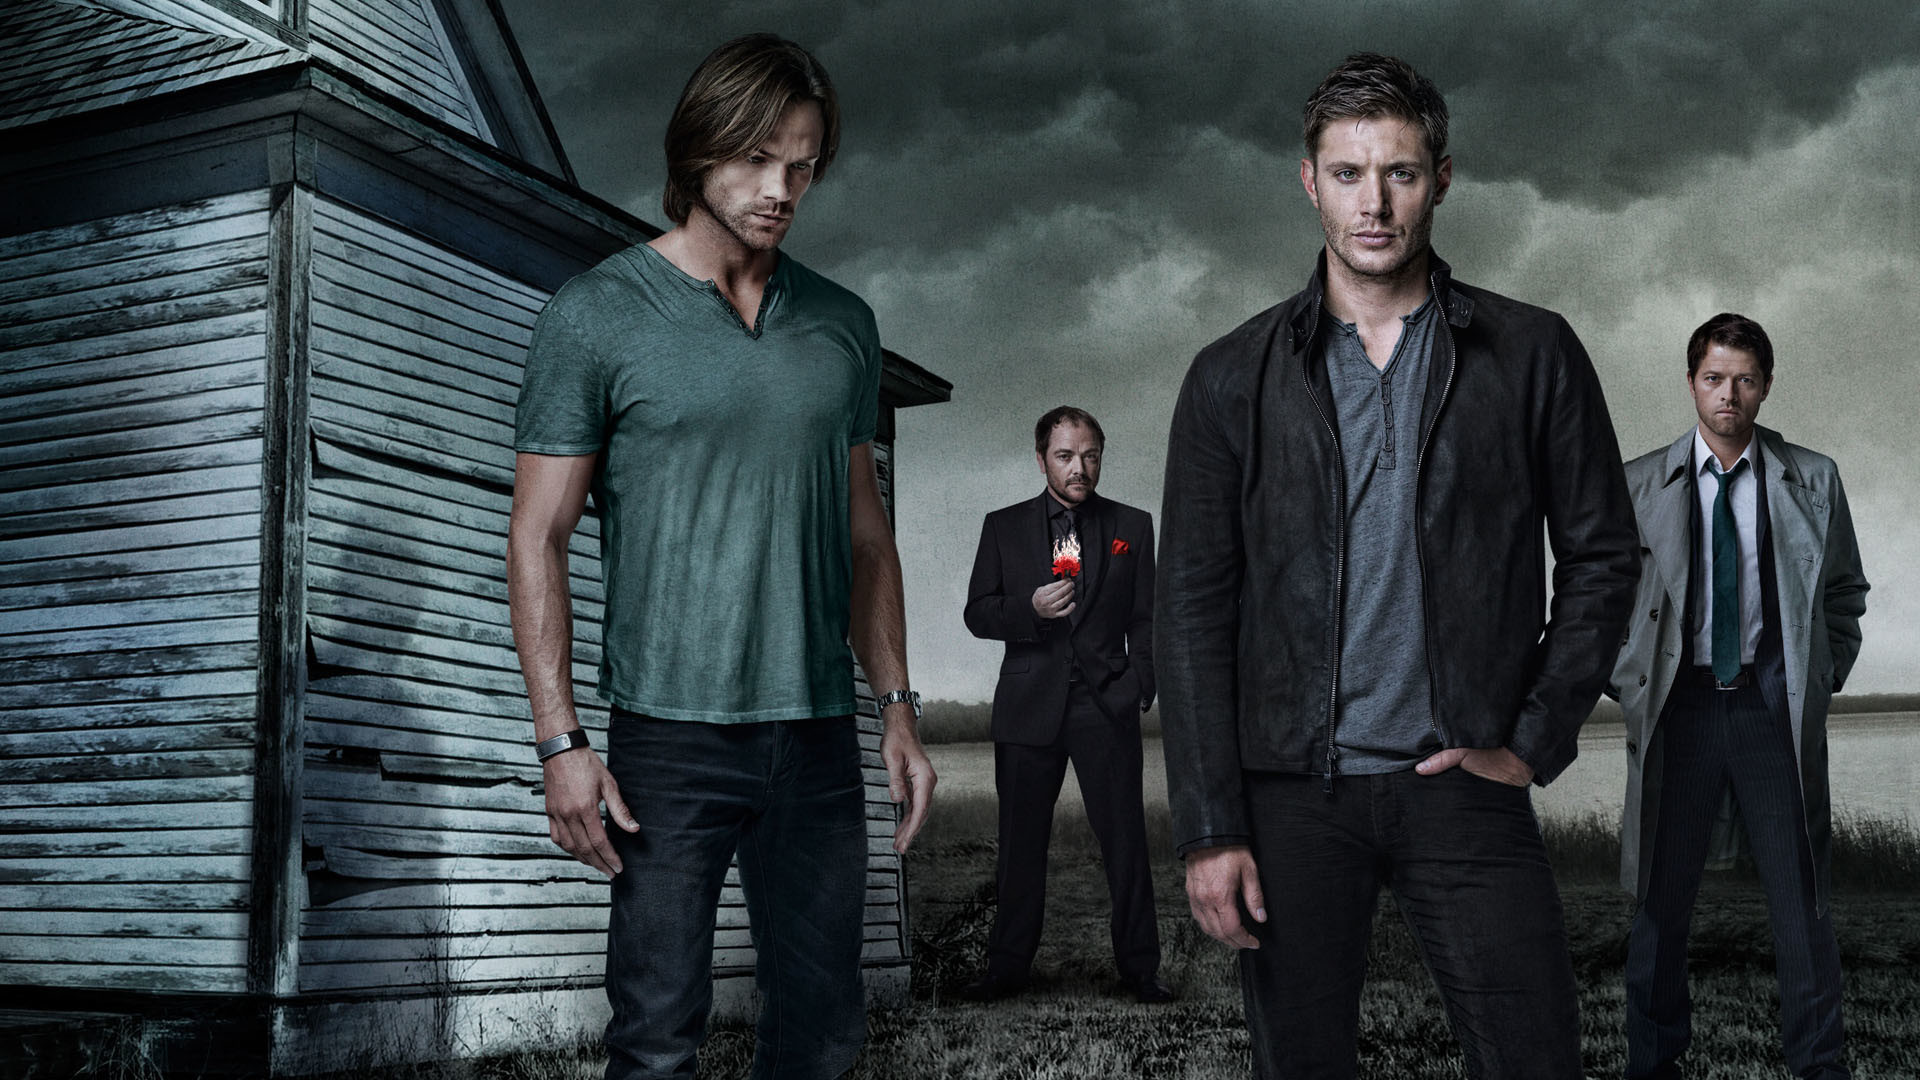 Supernatural Wallpapers, Pictures, Images